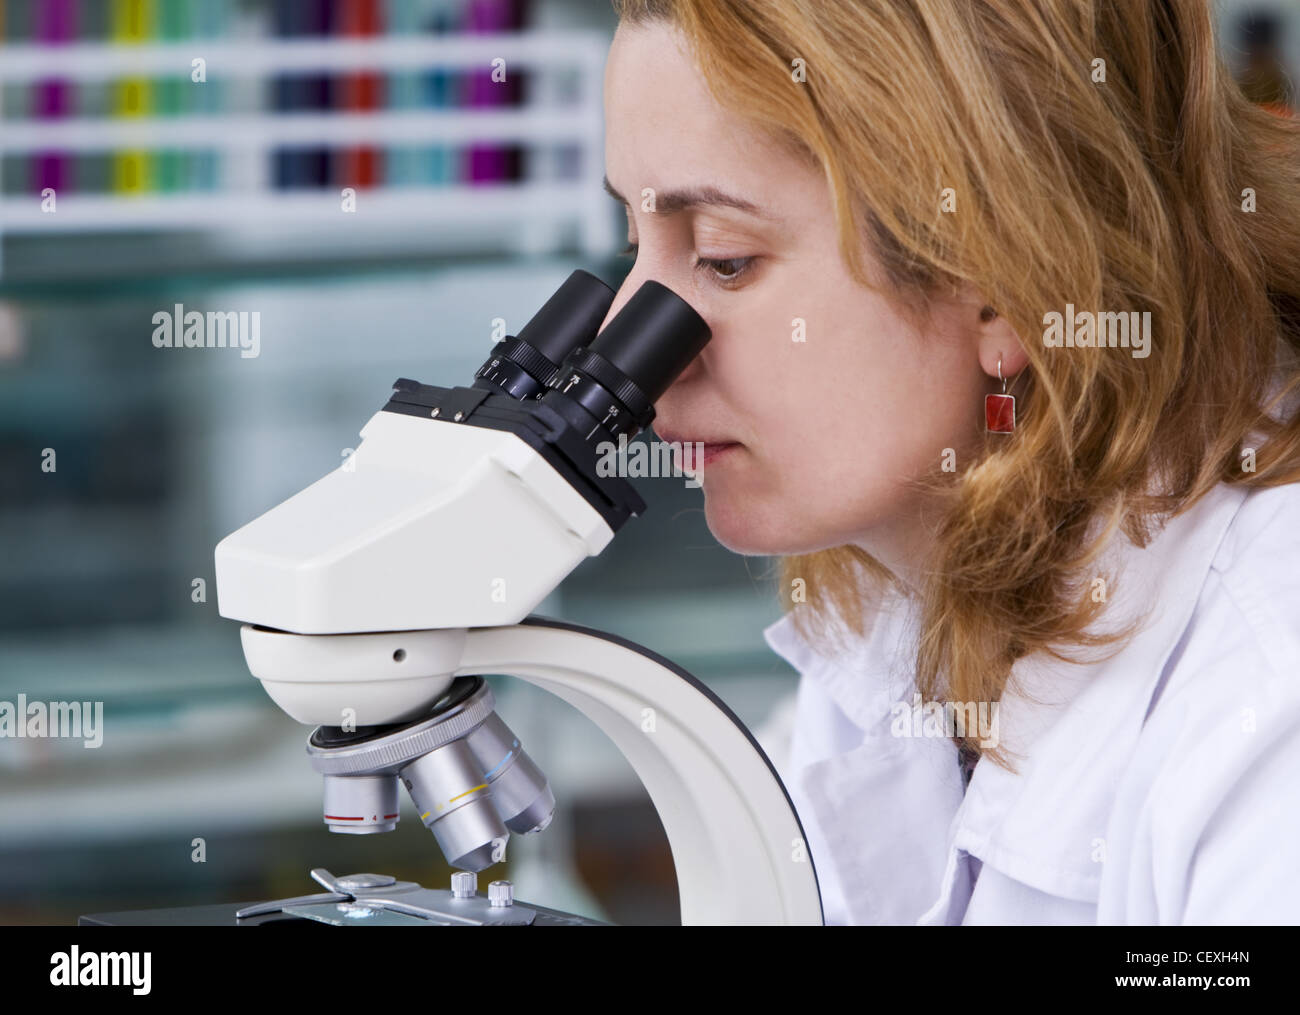 Female researcher looking through a microscope in a laboratory. Stock Photo